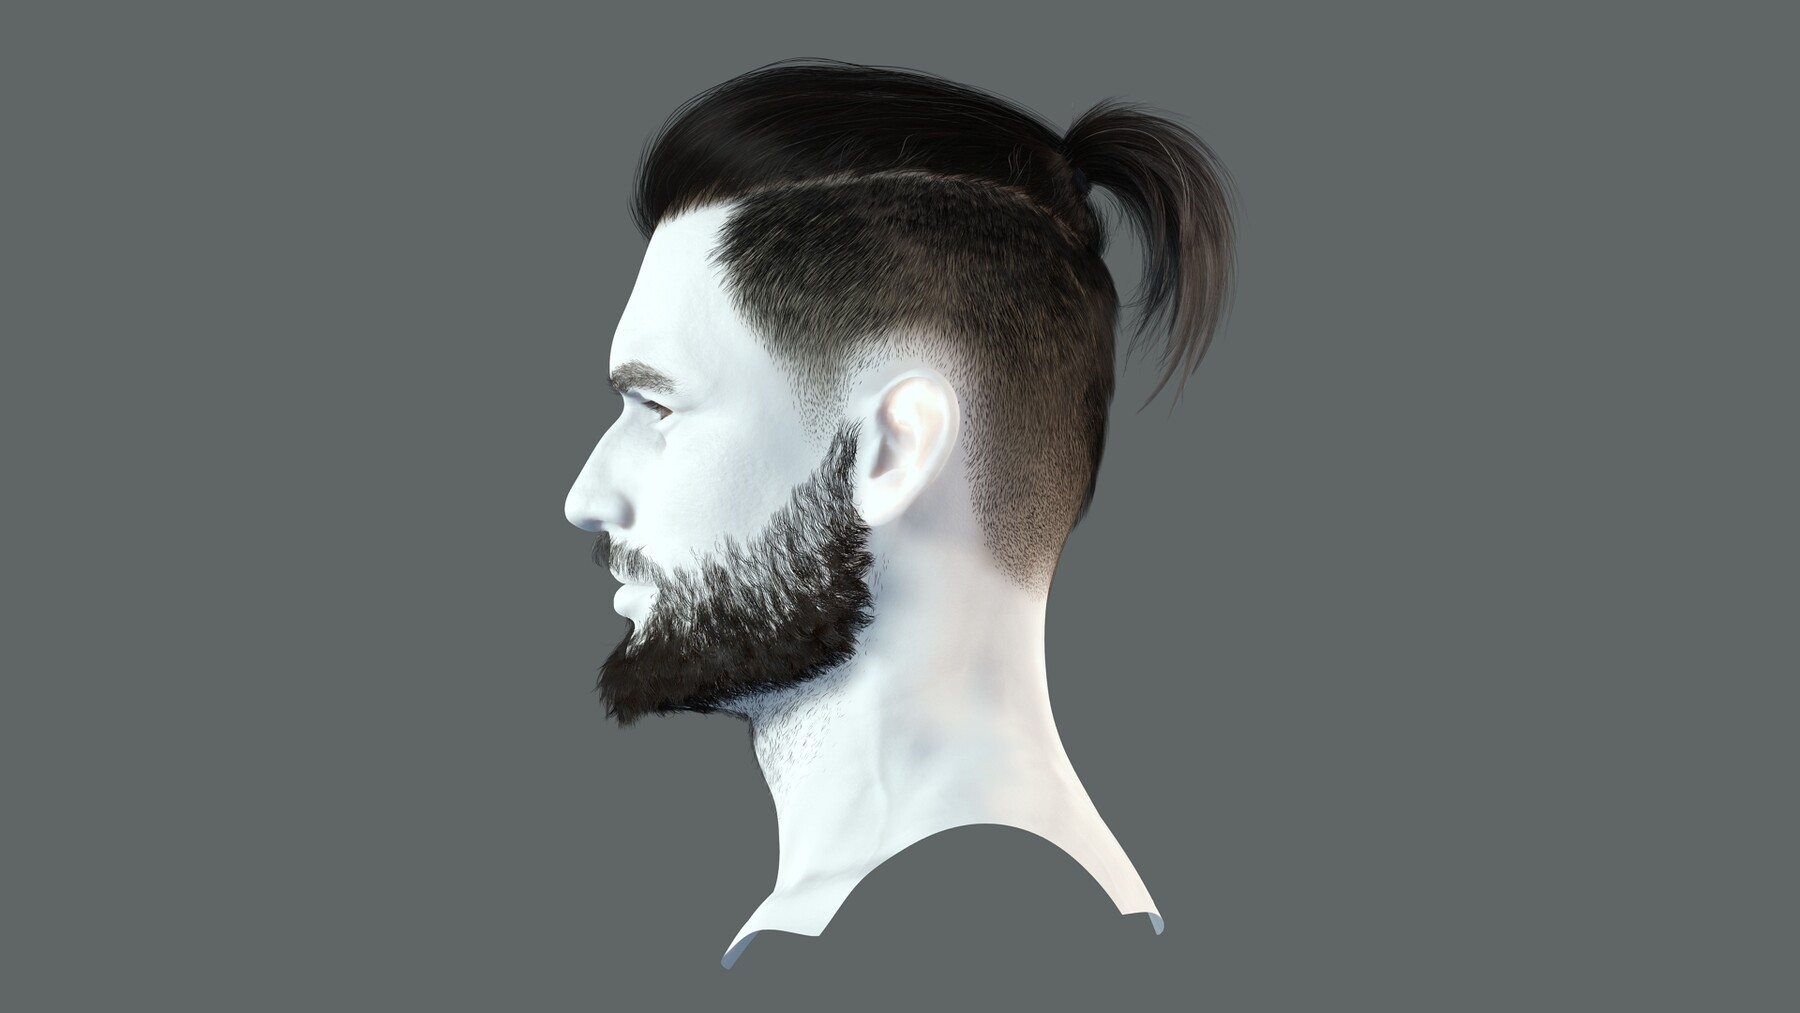 ArtStation - Realistic Hair Beard brows mustache p2 | Game Assets